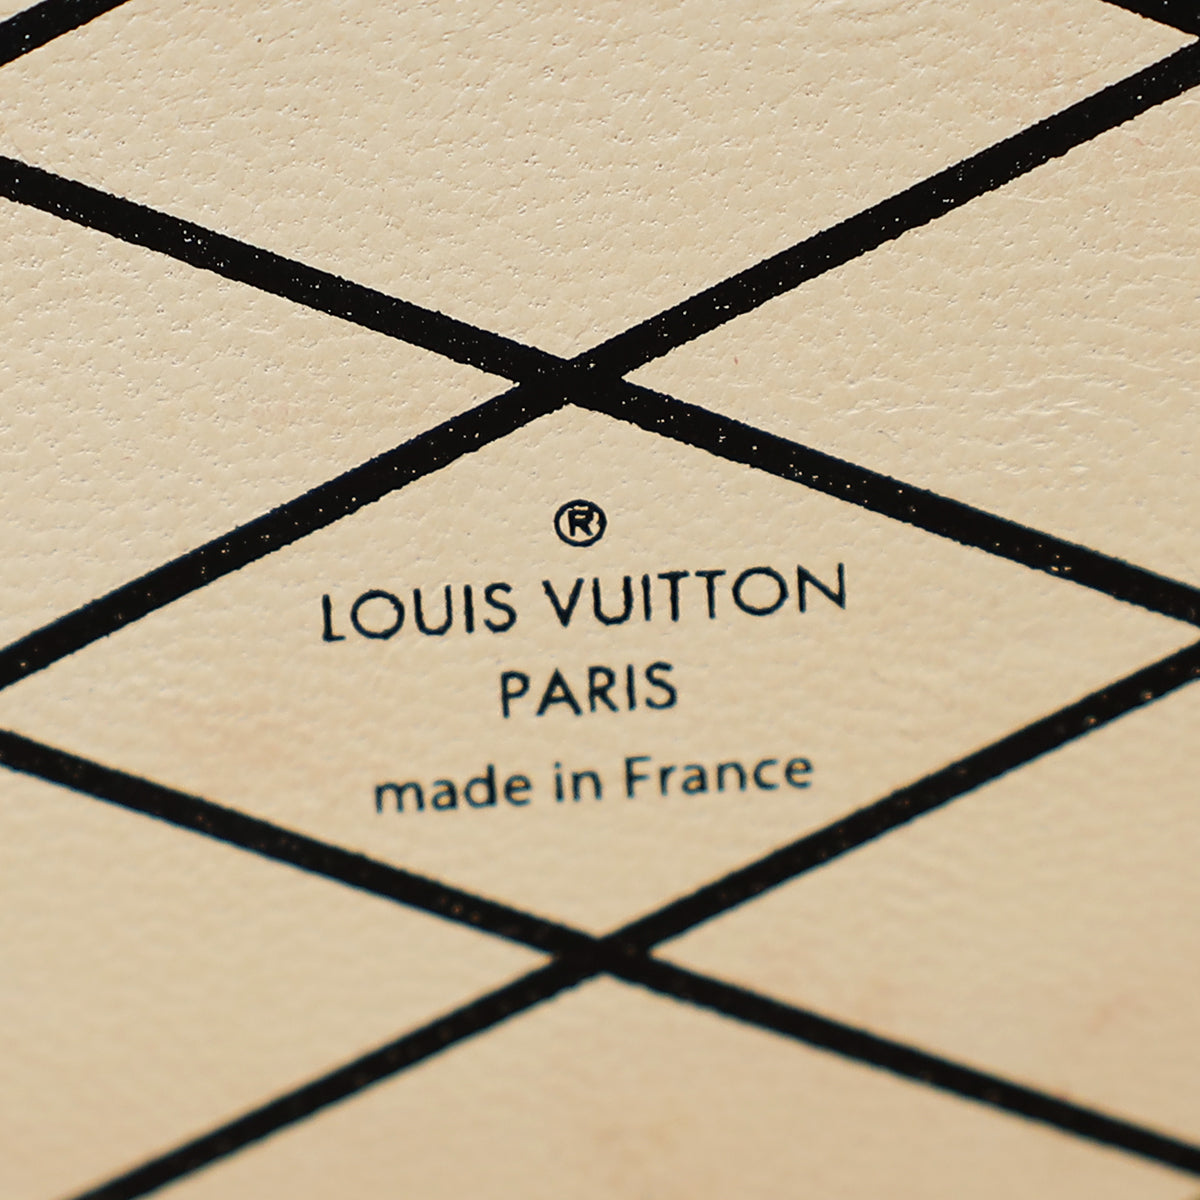 Load image into Gallery viewer, Louis Vuitton Monogram Petite Malle Bag
